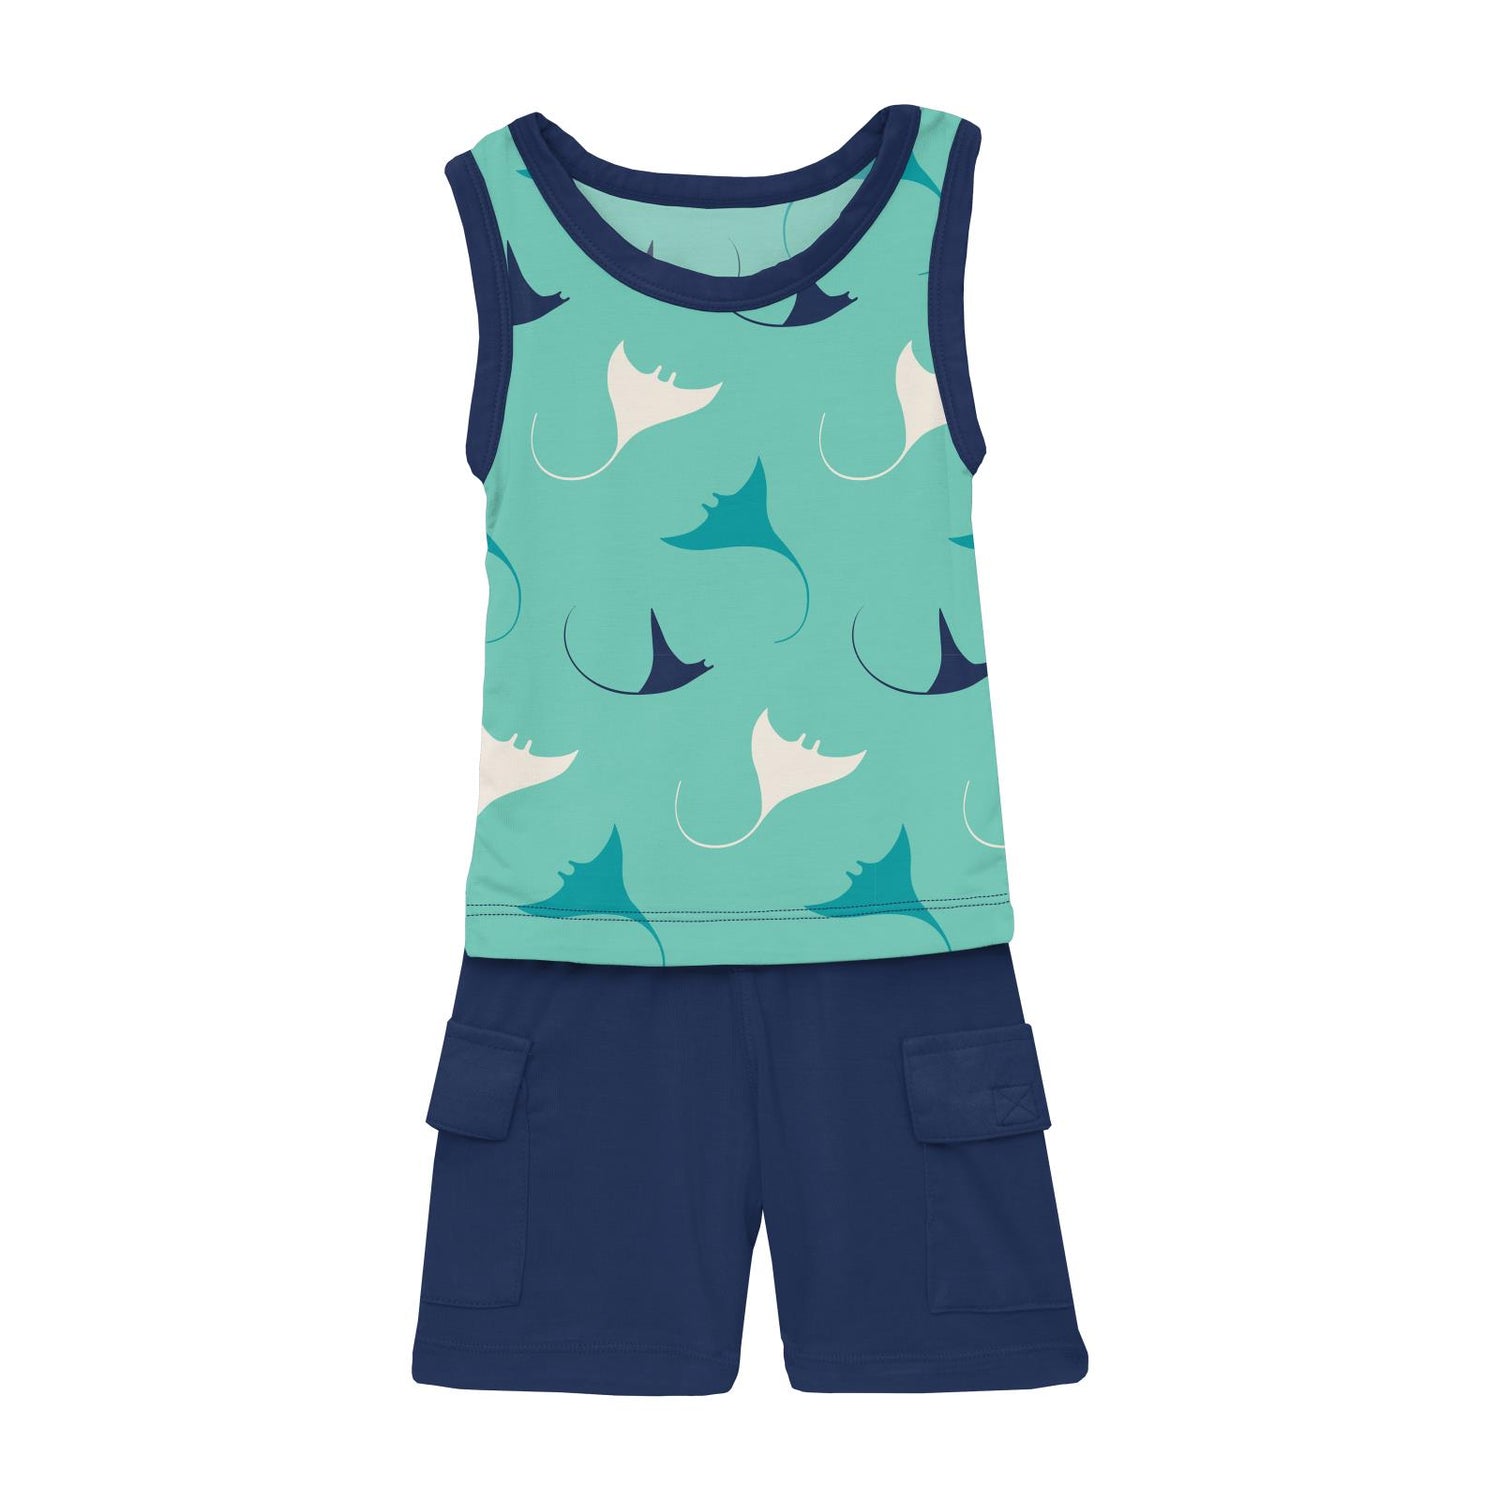 Tank & Cargo Short Outfit Set in Glass Manta Ray